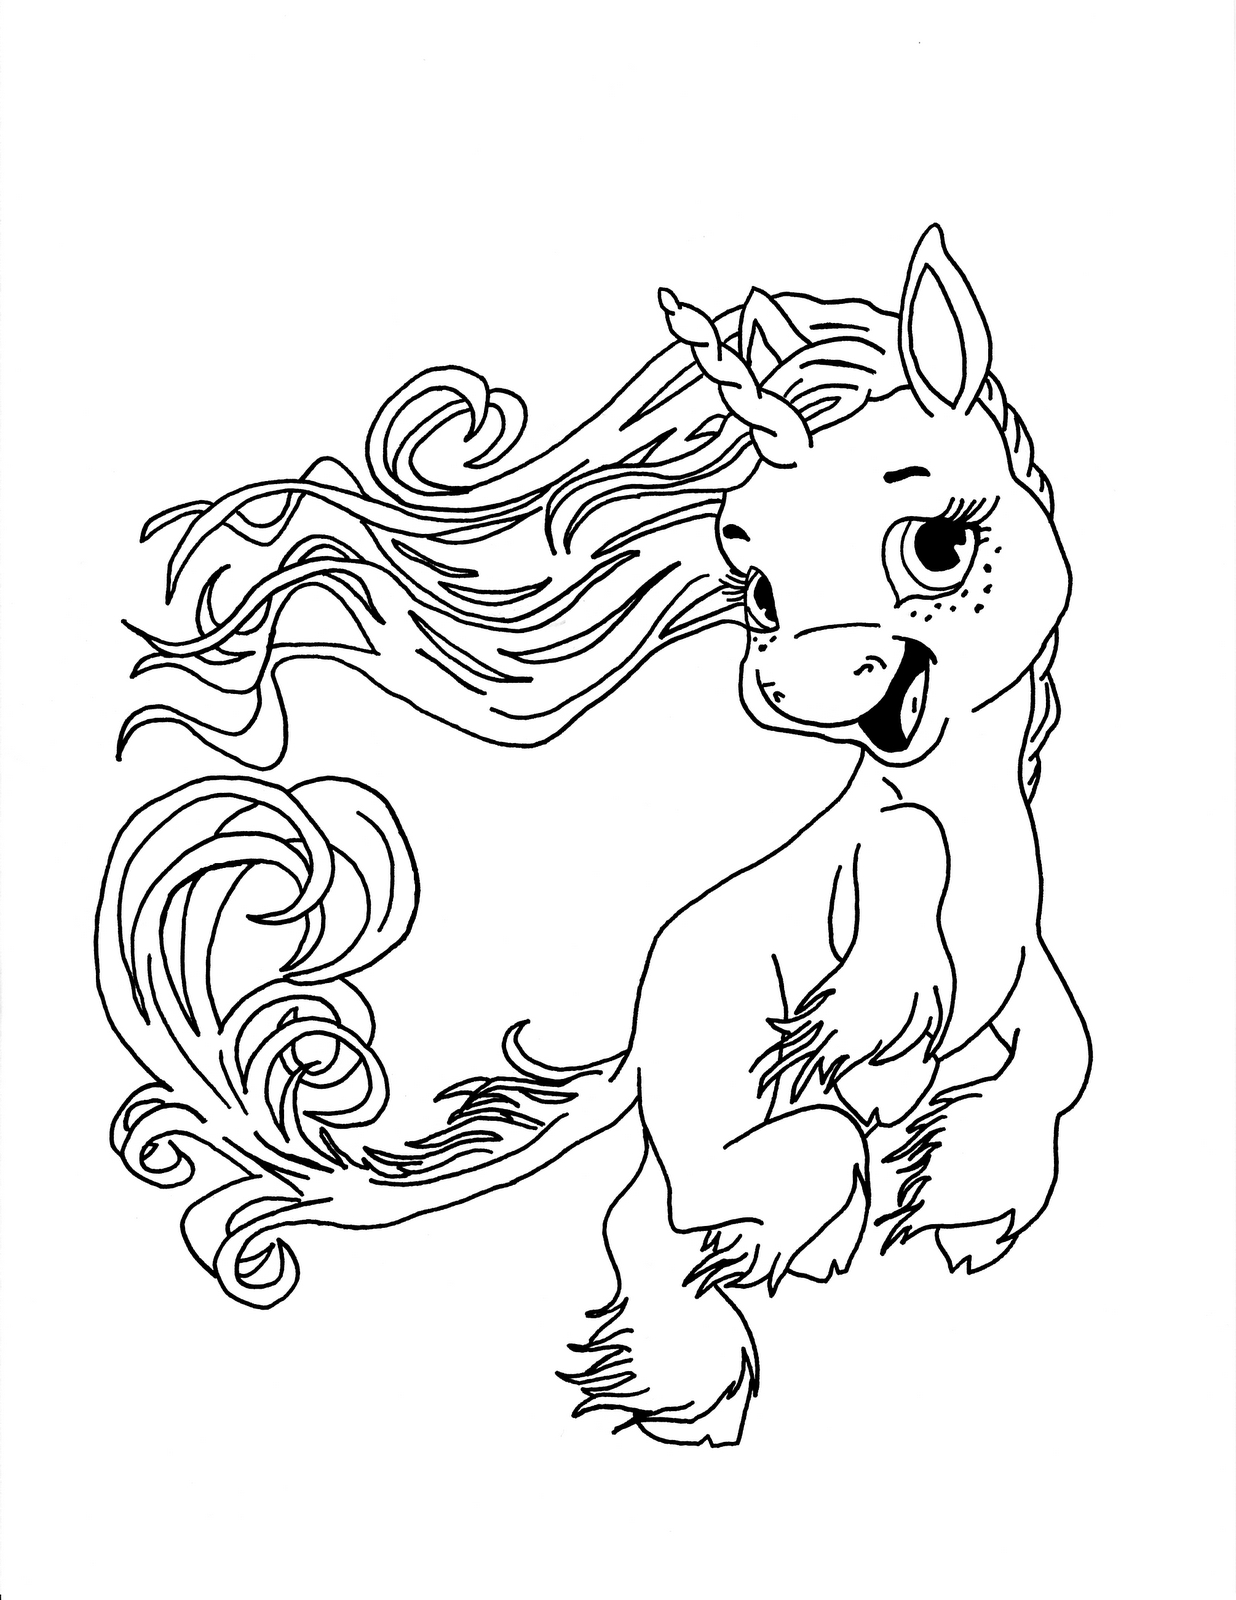 Unicorn Coloring Pages Online Cute Unicorn Coloring Pages To Print Free Coloring Library